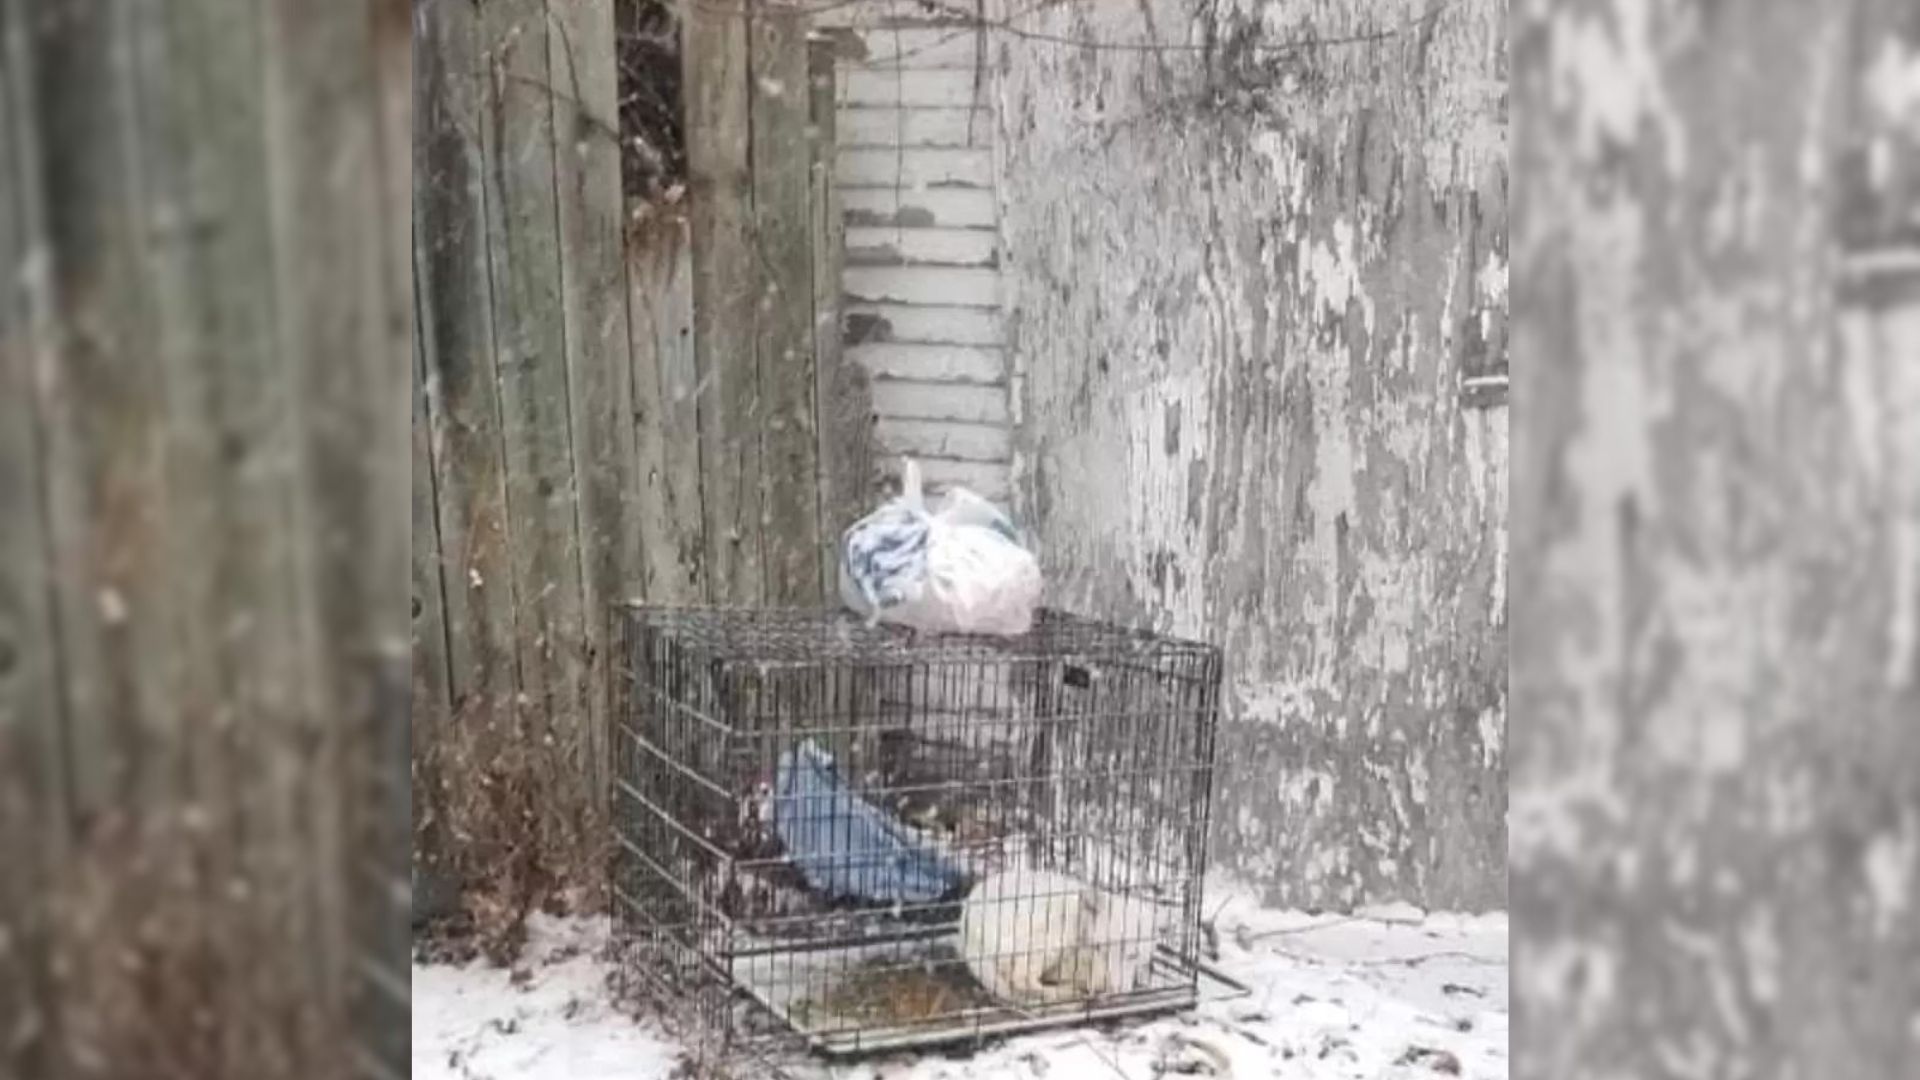 Rescuers Shocked To Discover A Strange Animal Freezing In A Small Crate